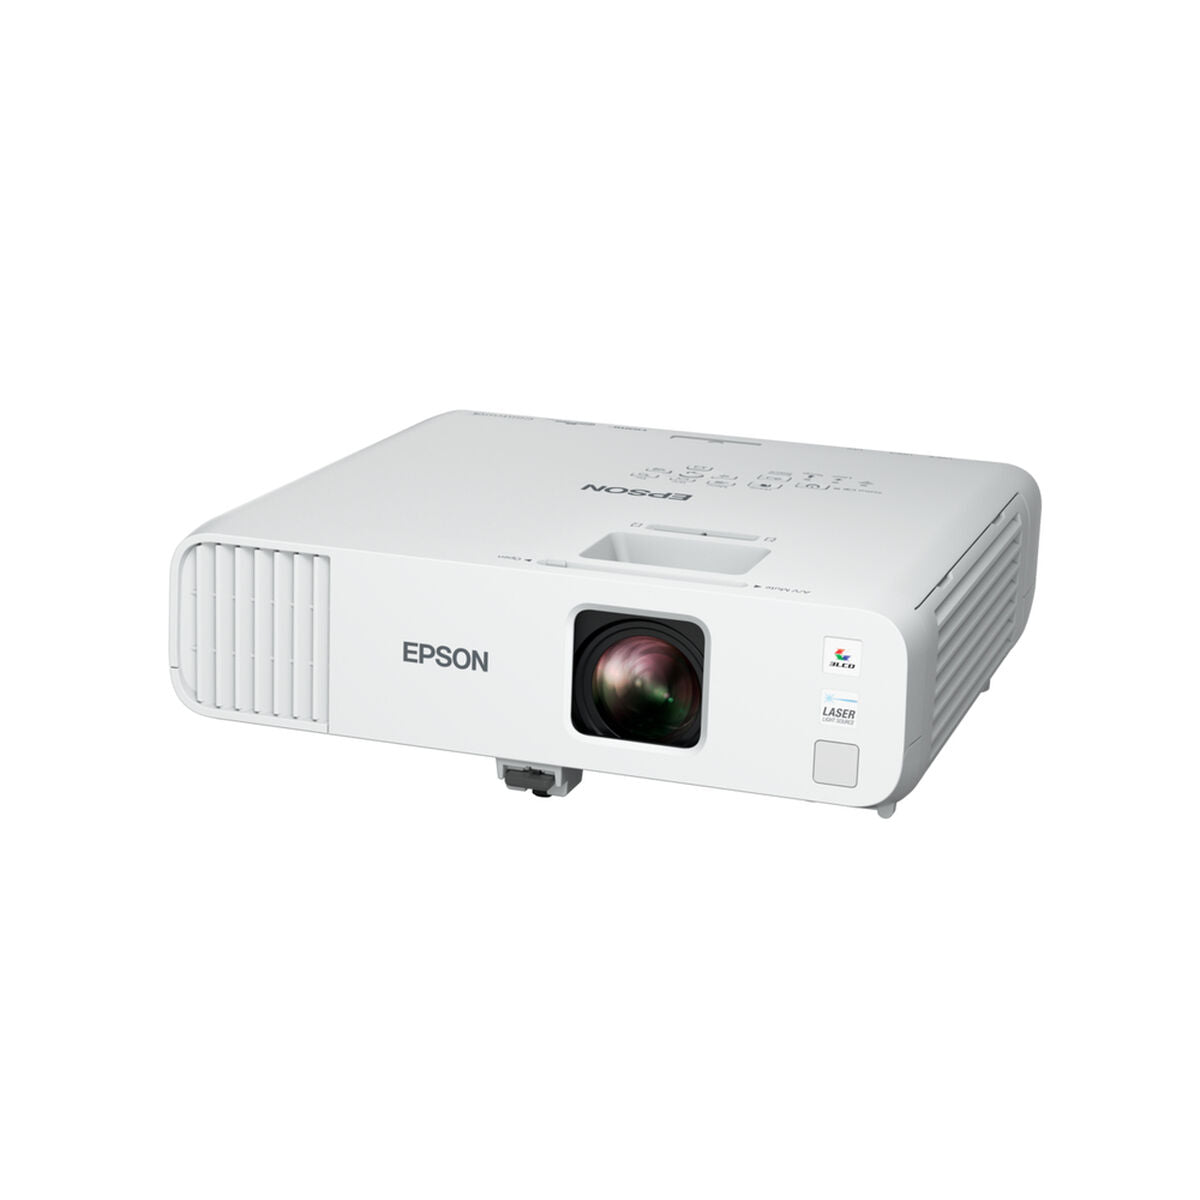 Projector Epson EB-L260F Full HD 4600 Lm 1920 x 1080 px, Epson, Electronics, TV, Video and home cinema, projector-epson-eb-l260f-full-hd-4600-lm-1920-x-1080-px, Brand_Epson, category-reference-2609, category-reference-2642, category-reference-2947, category-reference-t-18805, category-reference-t-19653, cinema and television, computers / peripherals, Condition_NEW, entertainment, office, Price_+ 1000, RiotNook